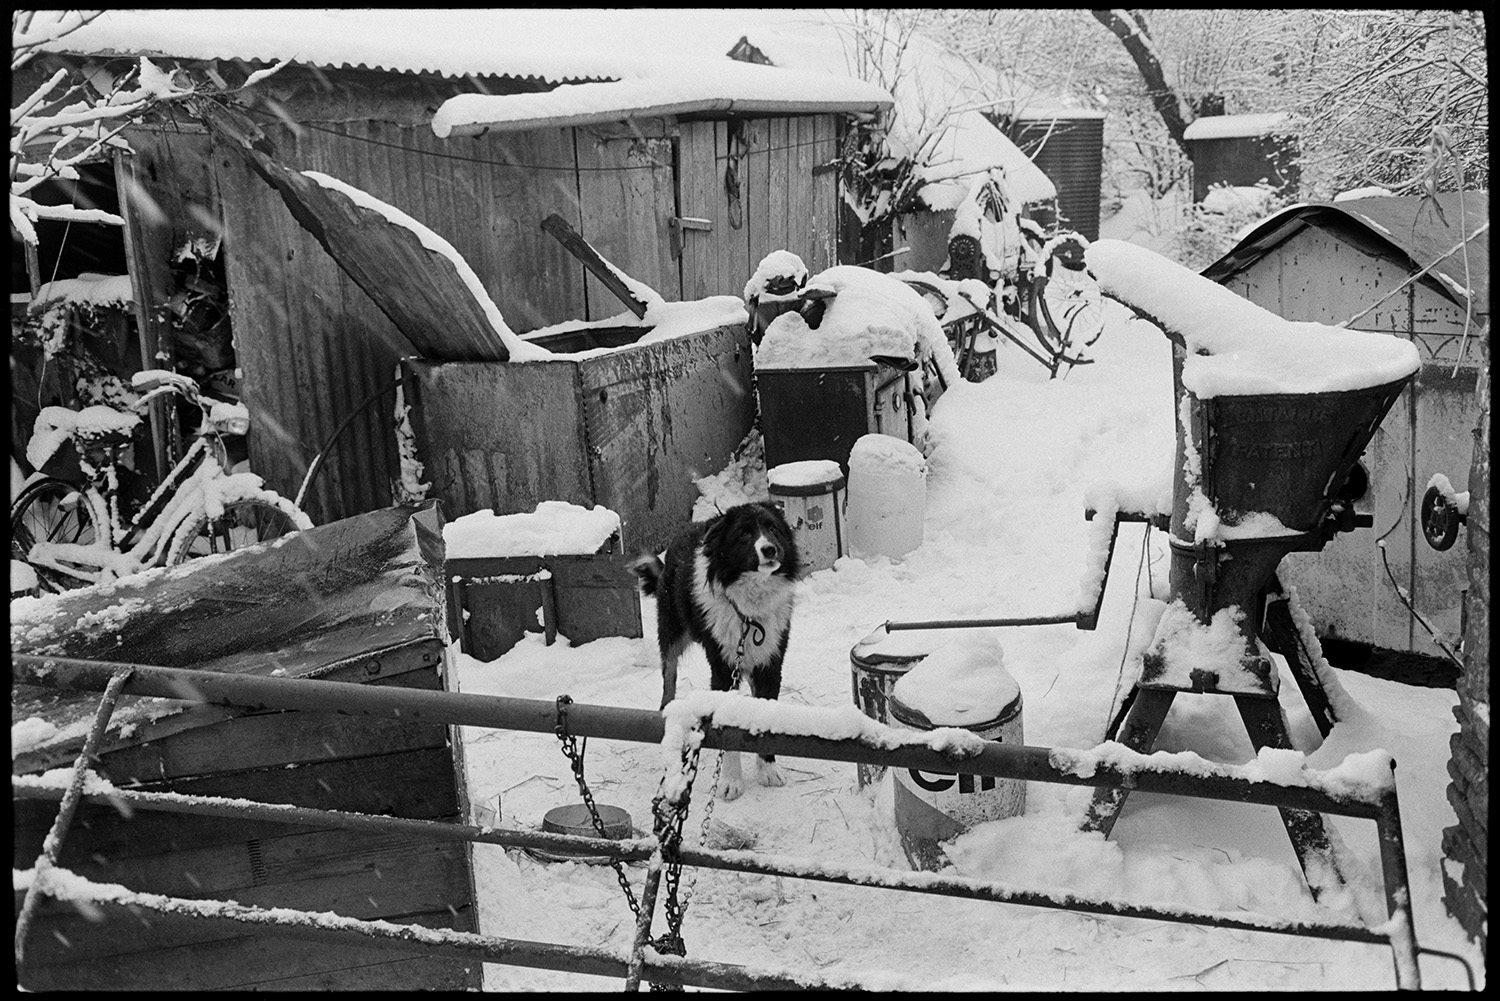 Snow covered farmyard with dog, sheds and implements.
[The snow covered farmyard at Cuppers Piece, Beaford, with a dog chained to a metal gate, bicycles, farm machinery and bins alongside snow covered corrugated iron sheds and trees.]